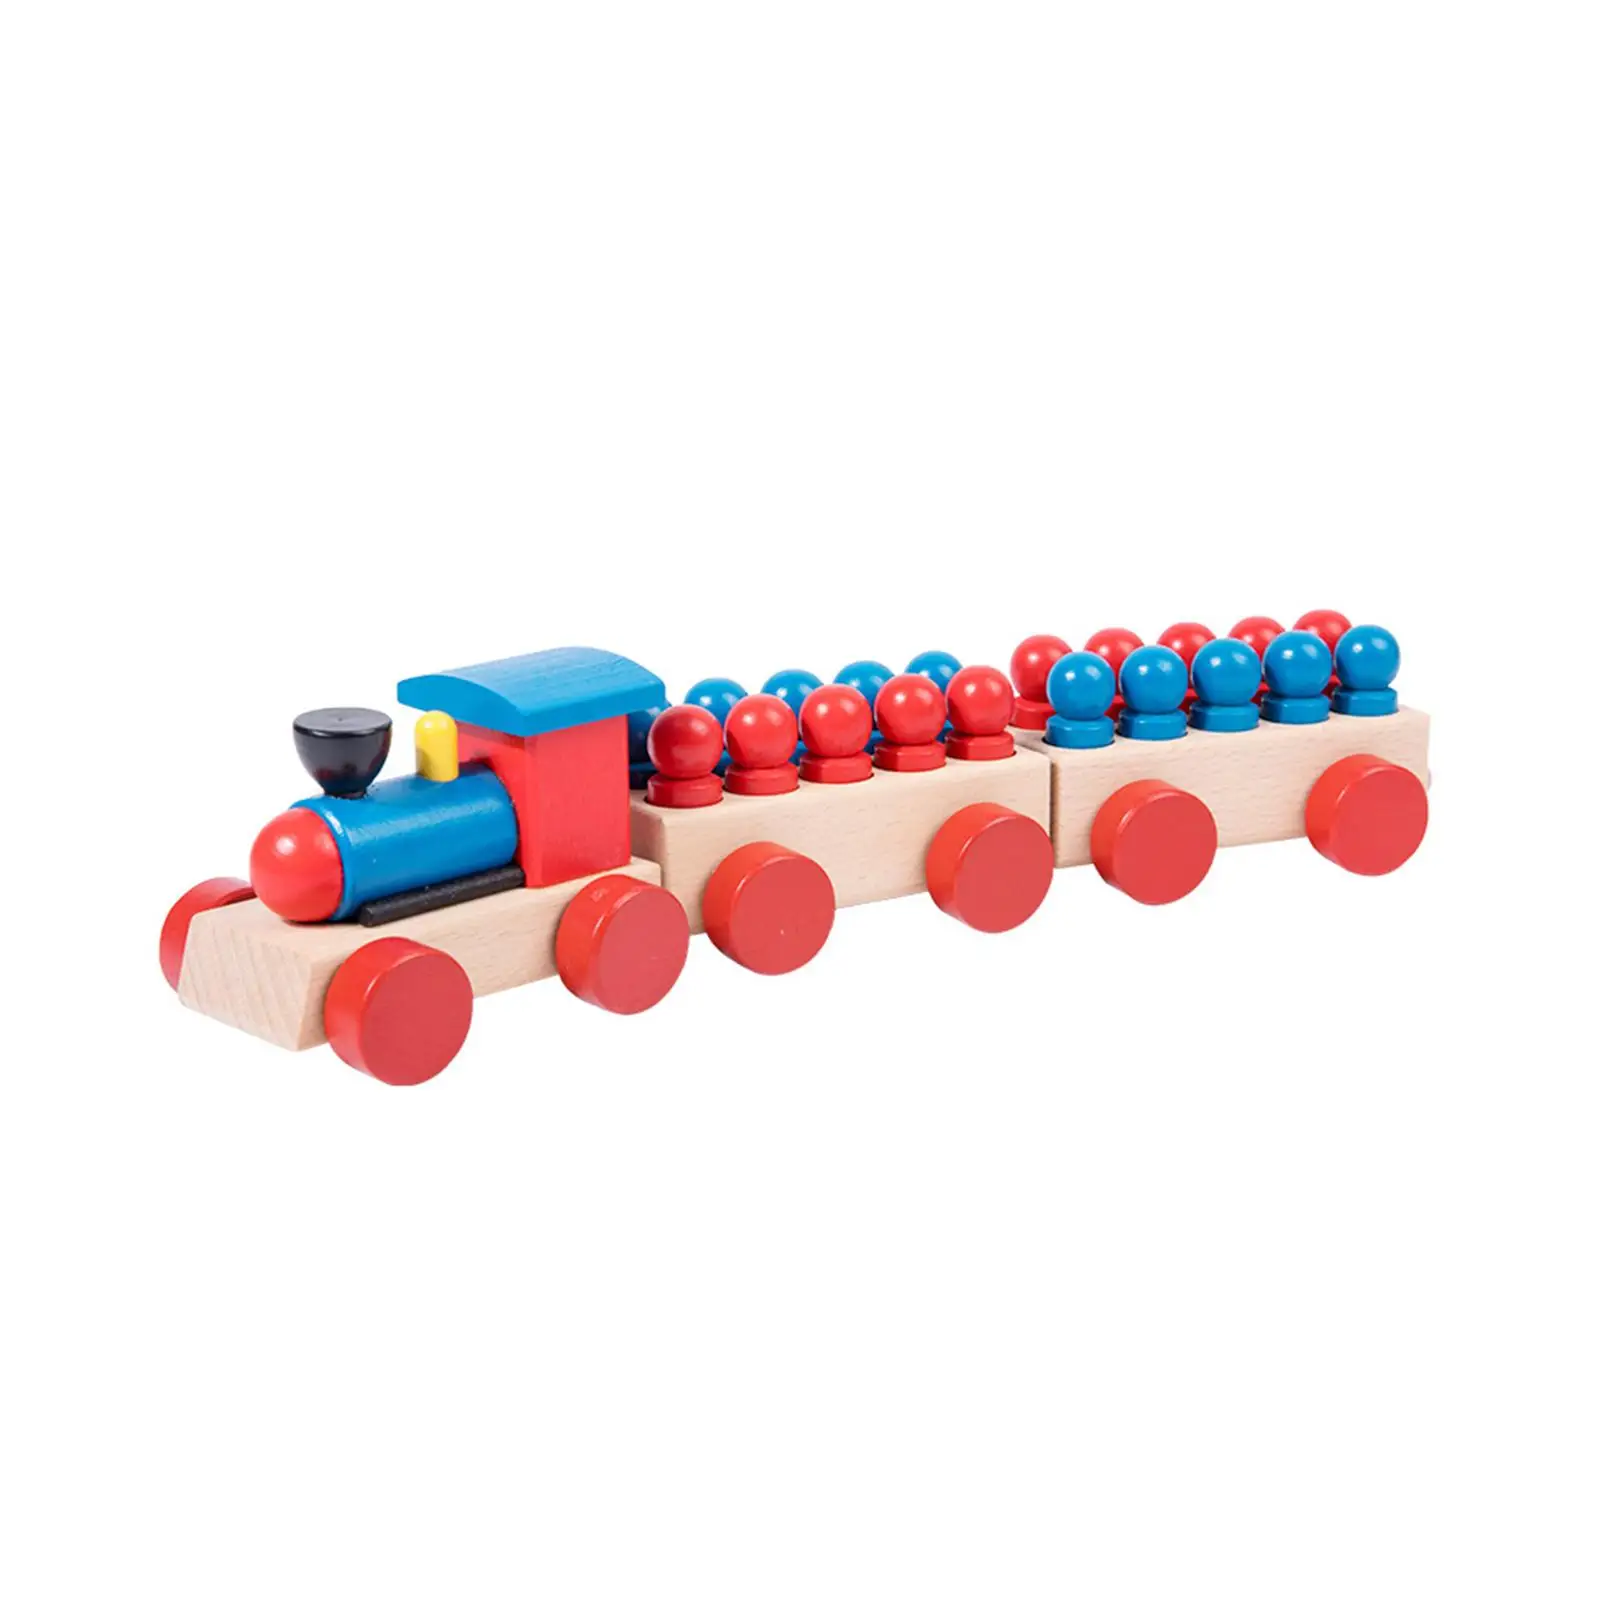 Wooden Train Toddlers Toys Pull Train Countinng Games Teaching Aids for Baby Boys Girls 1 2 3 Year Old Kids Birthday Gift